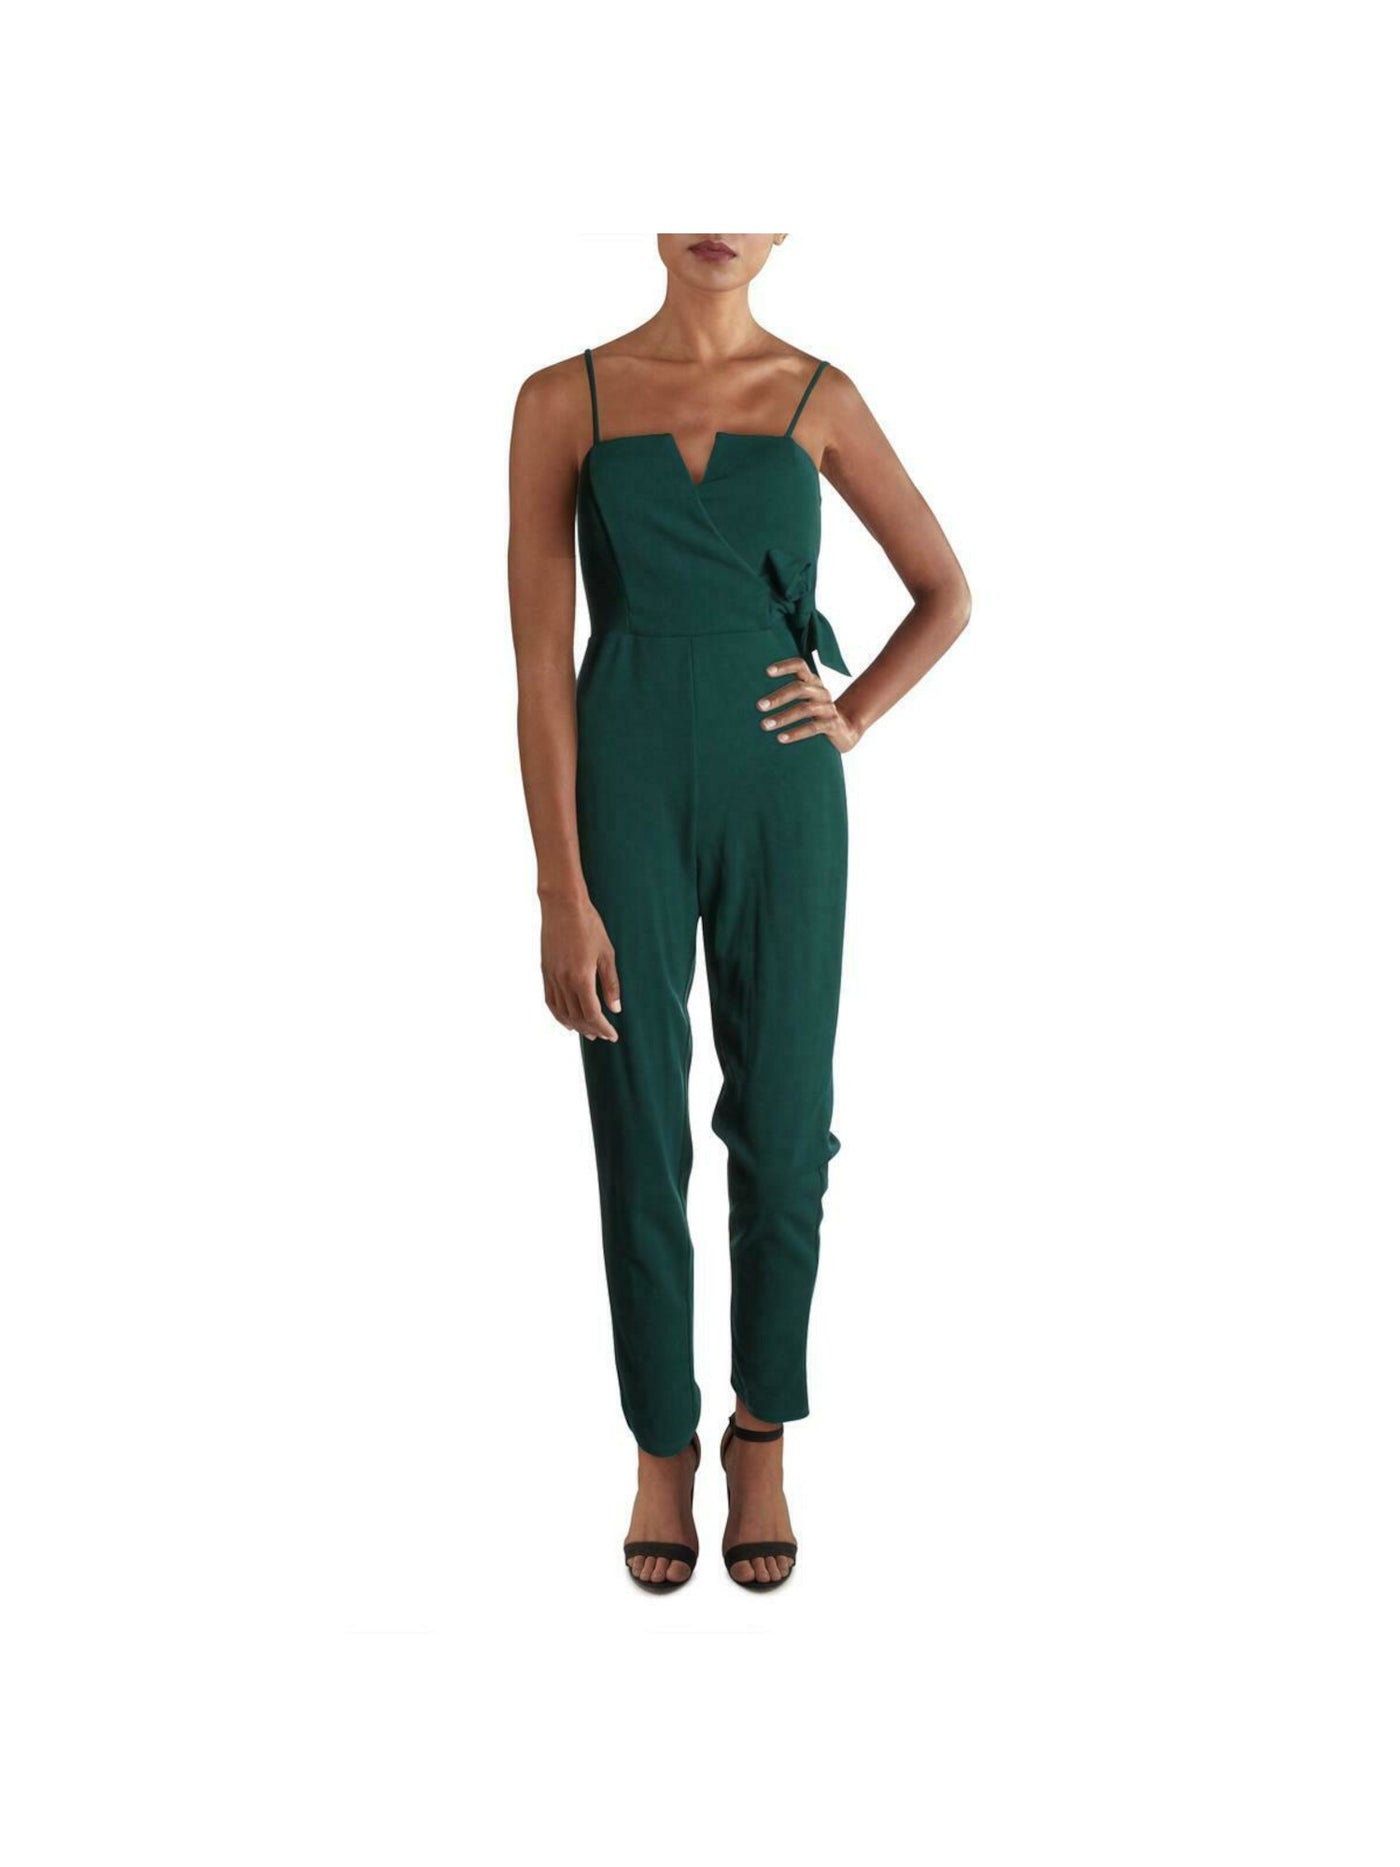 MAX + ASH Womens Teal Tie Spaghetti Strap Party Jumpsuit S